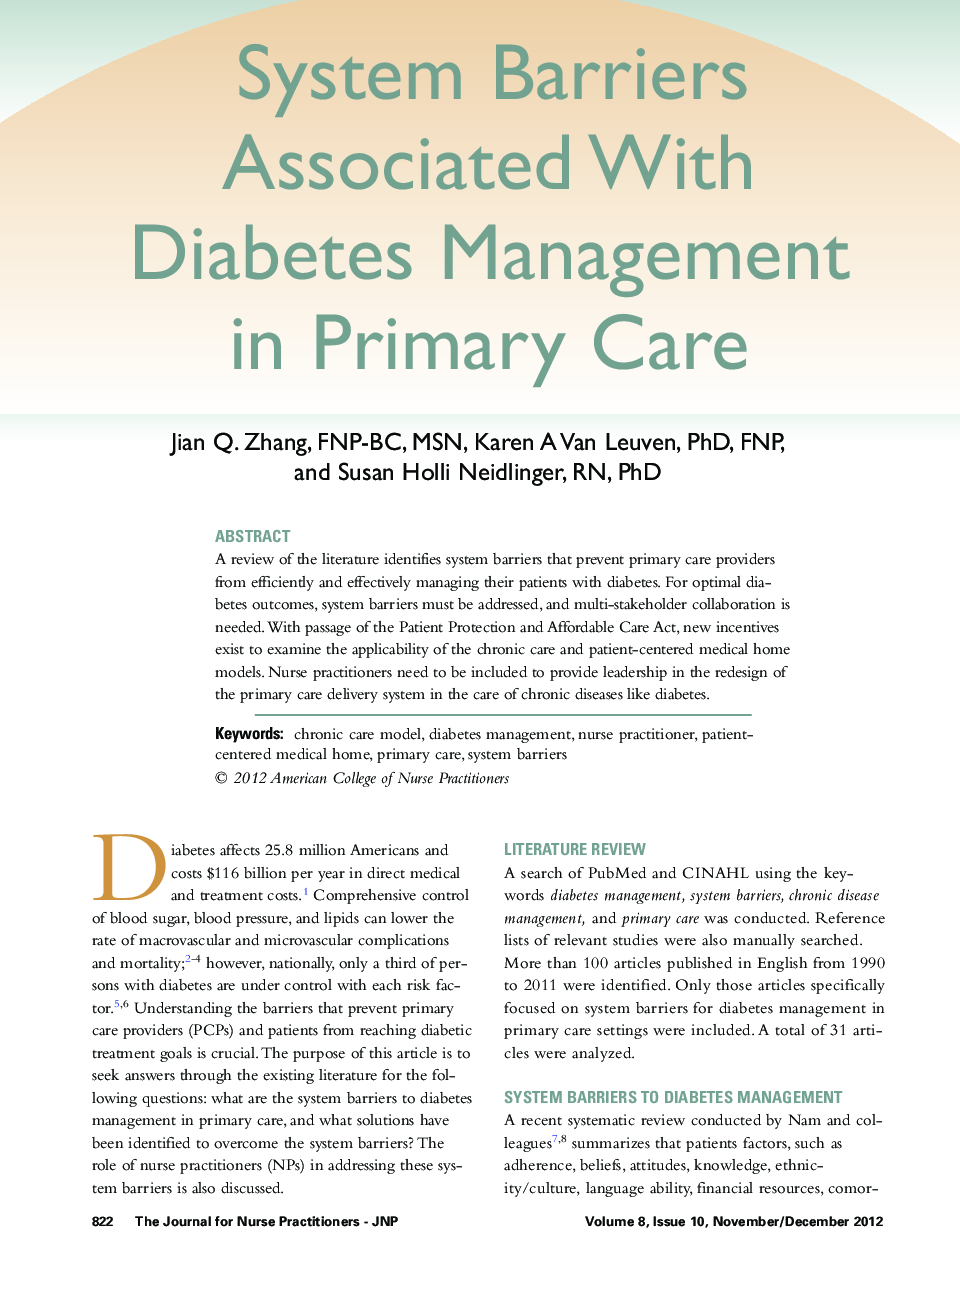 System Barriers Associated With Diabetes Management in Primary Care 